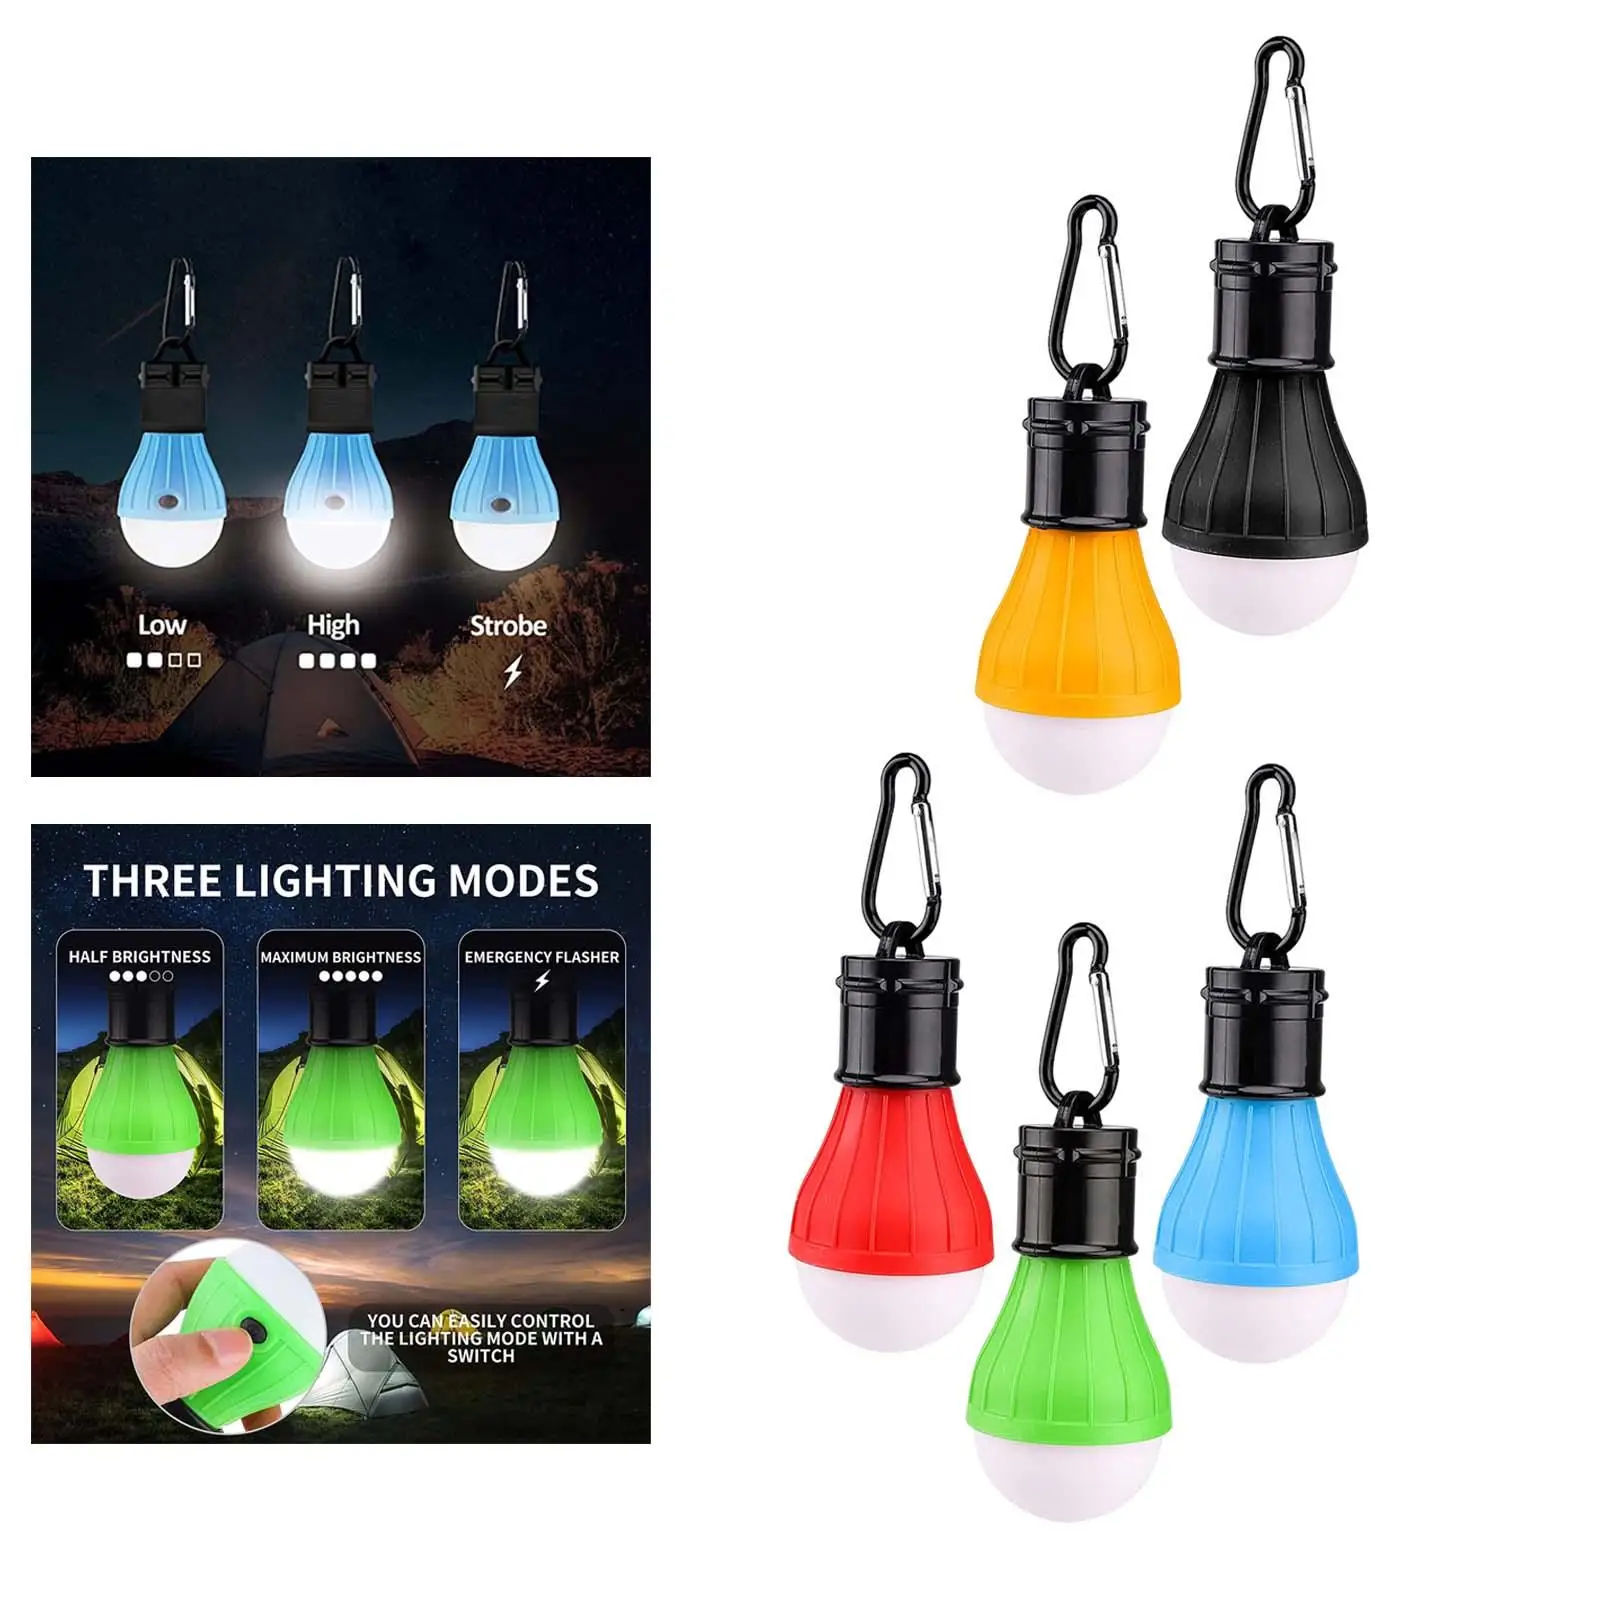 5x LED Camping Lantern Light Tent Lamp Waterproof Emergency 3 Modes Bulb for Indoor Car Repairing Outdoor Mountaineering